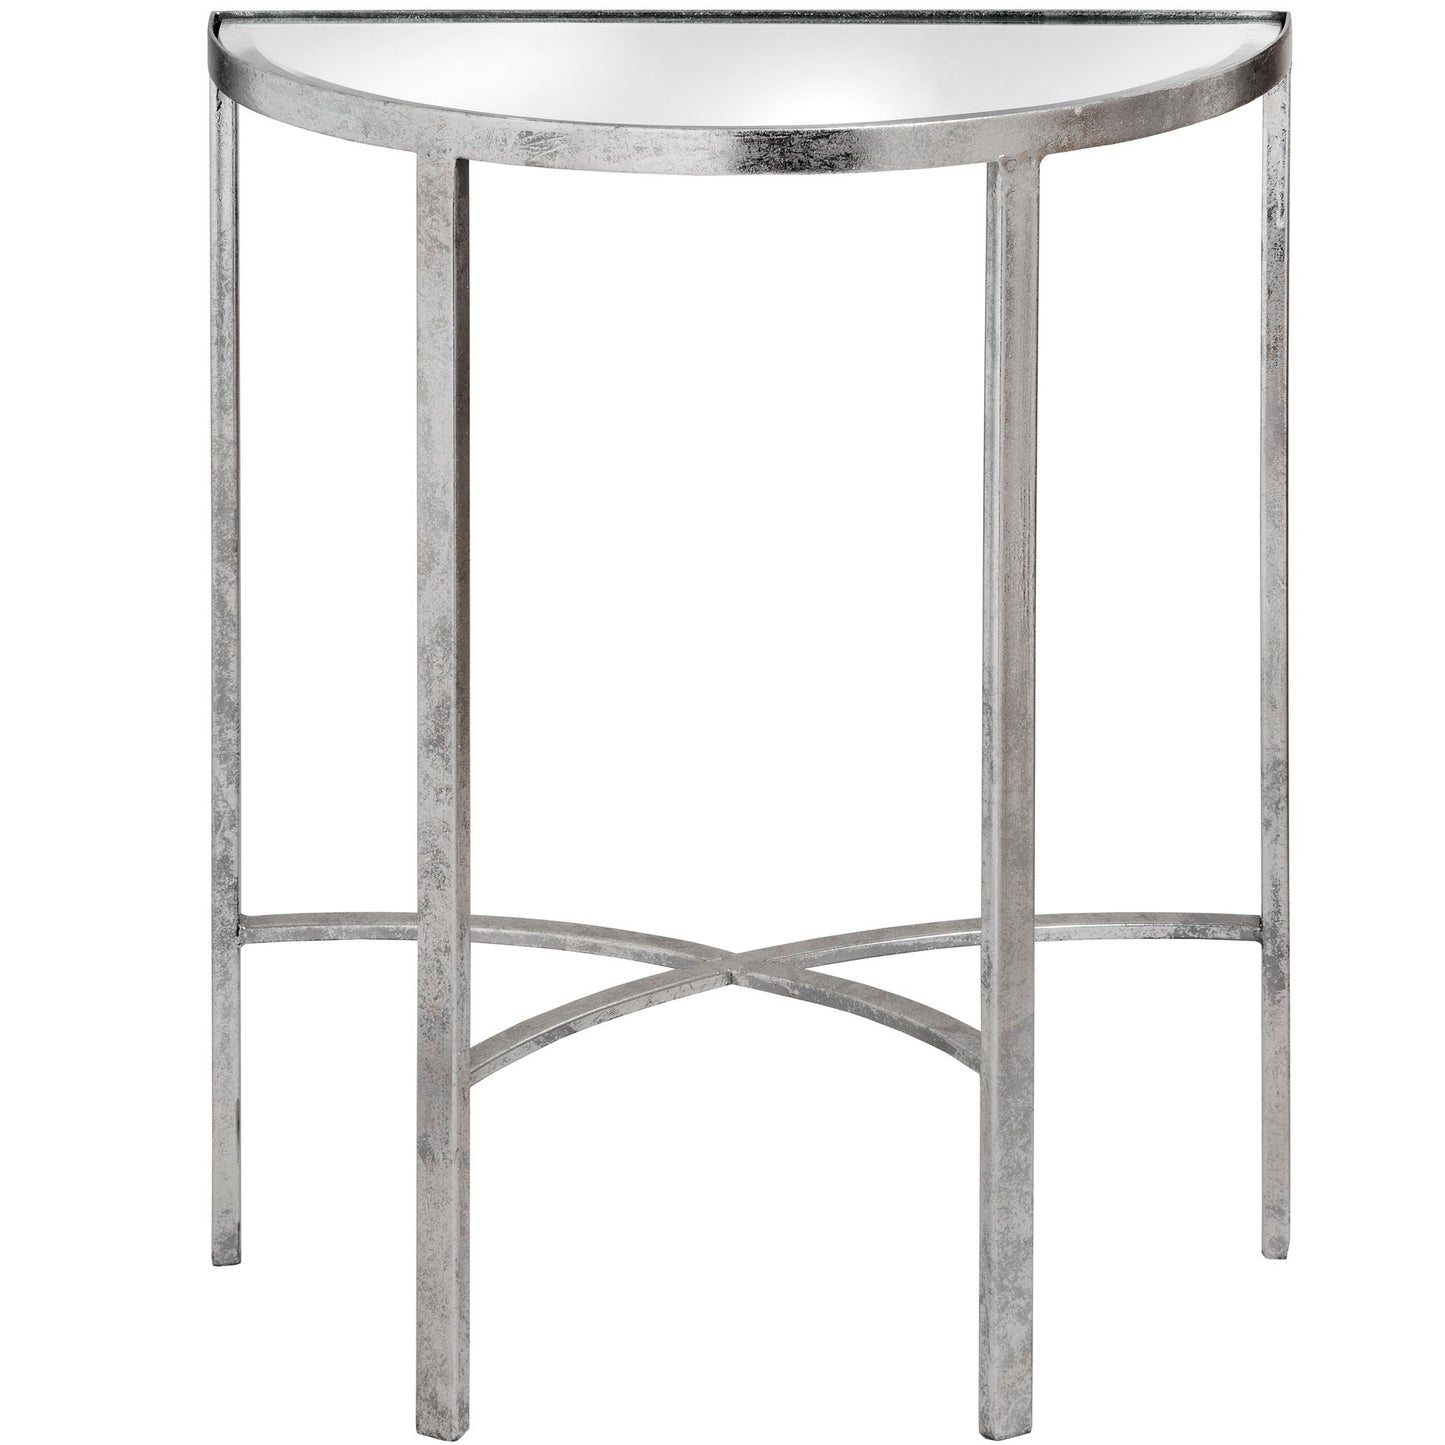 Mirrored Silver Half Moon Table With Cross Detail